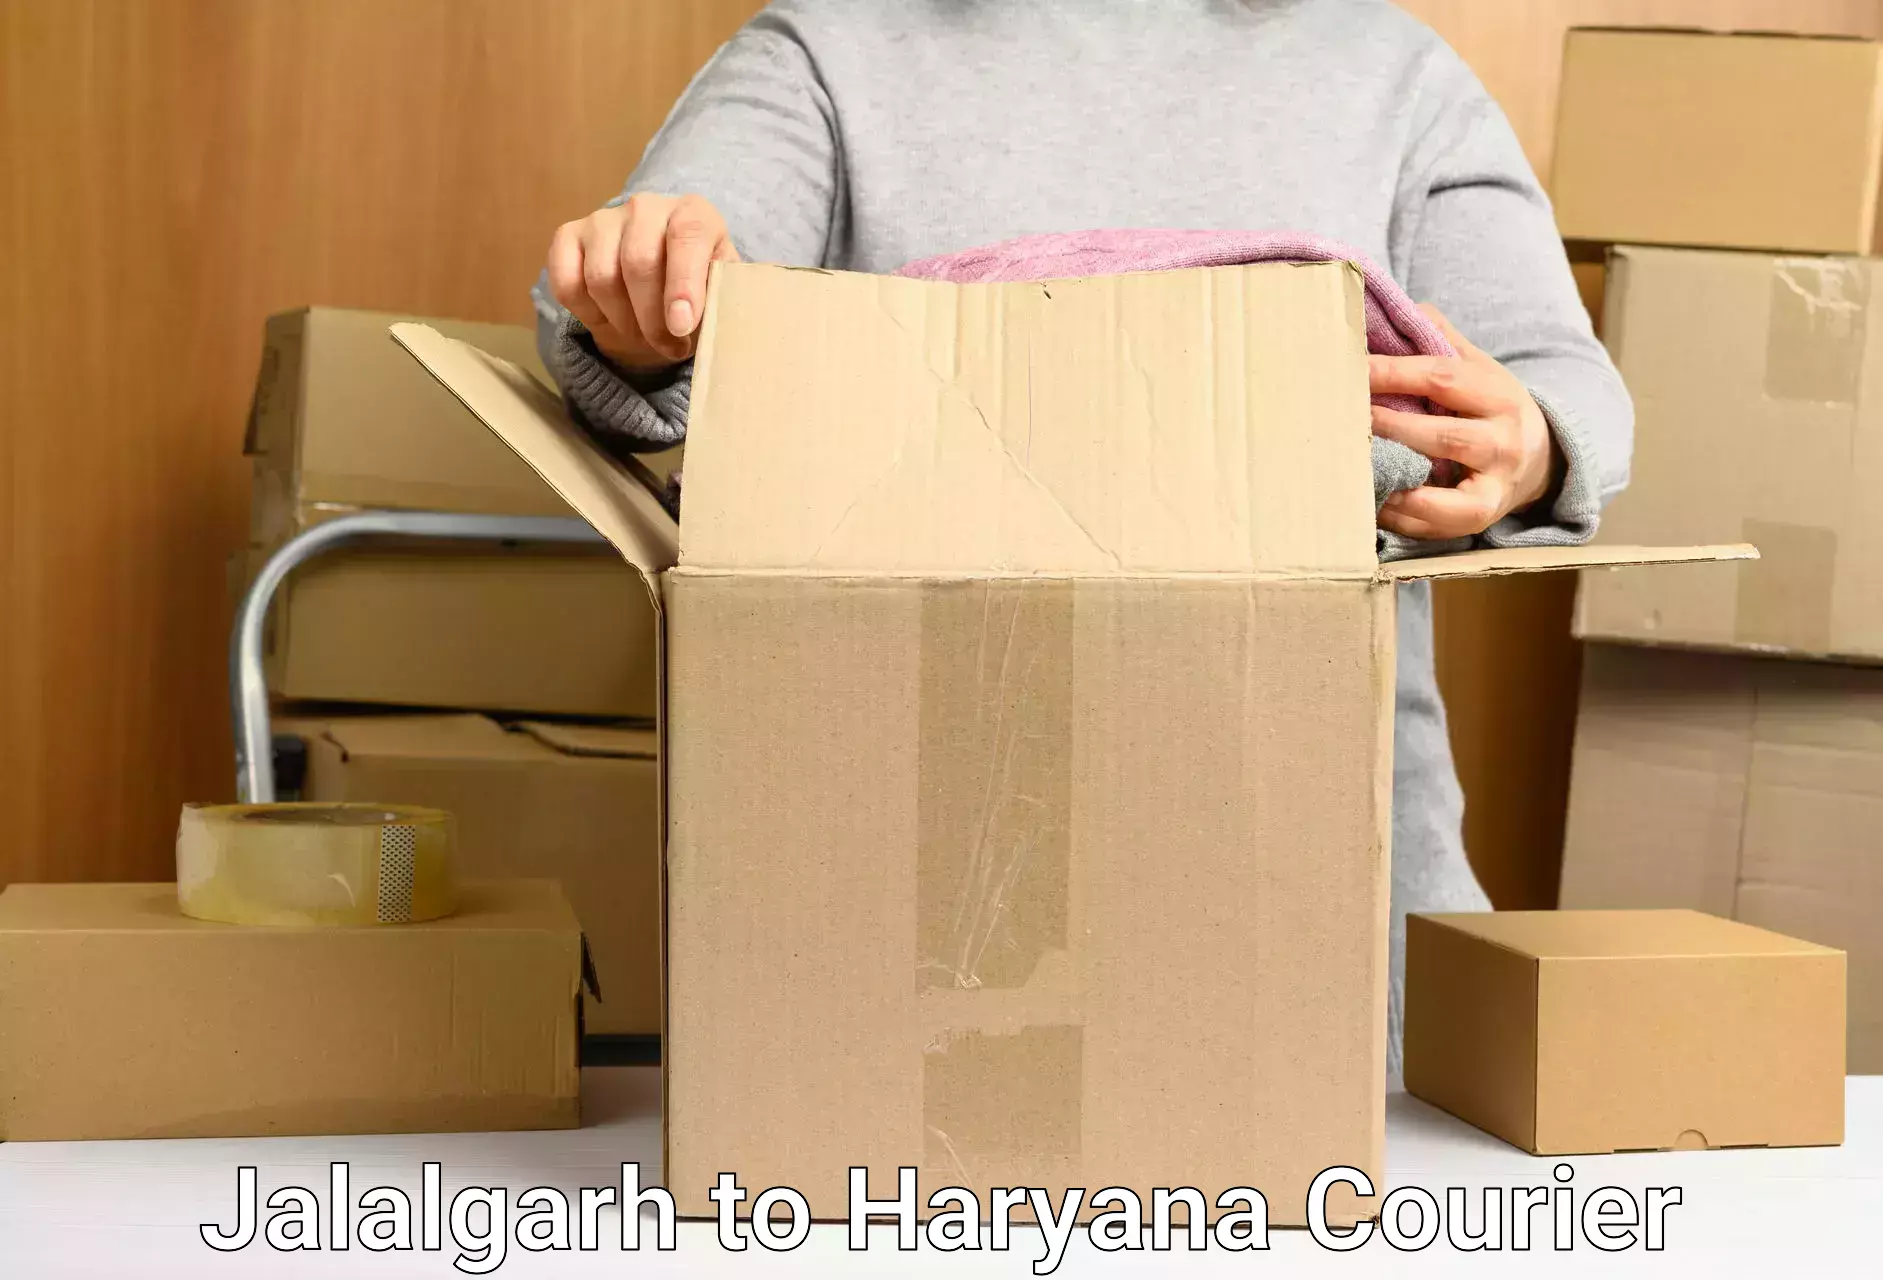 Customer-oriented courier services Jalalgarh to Bhiwani